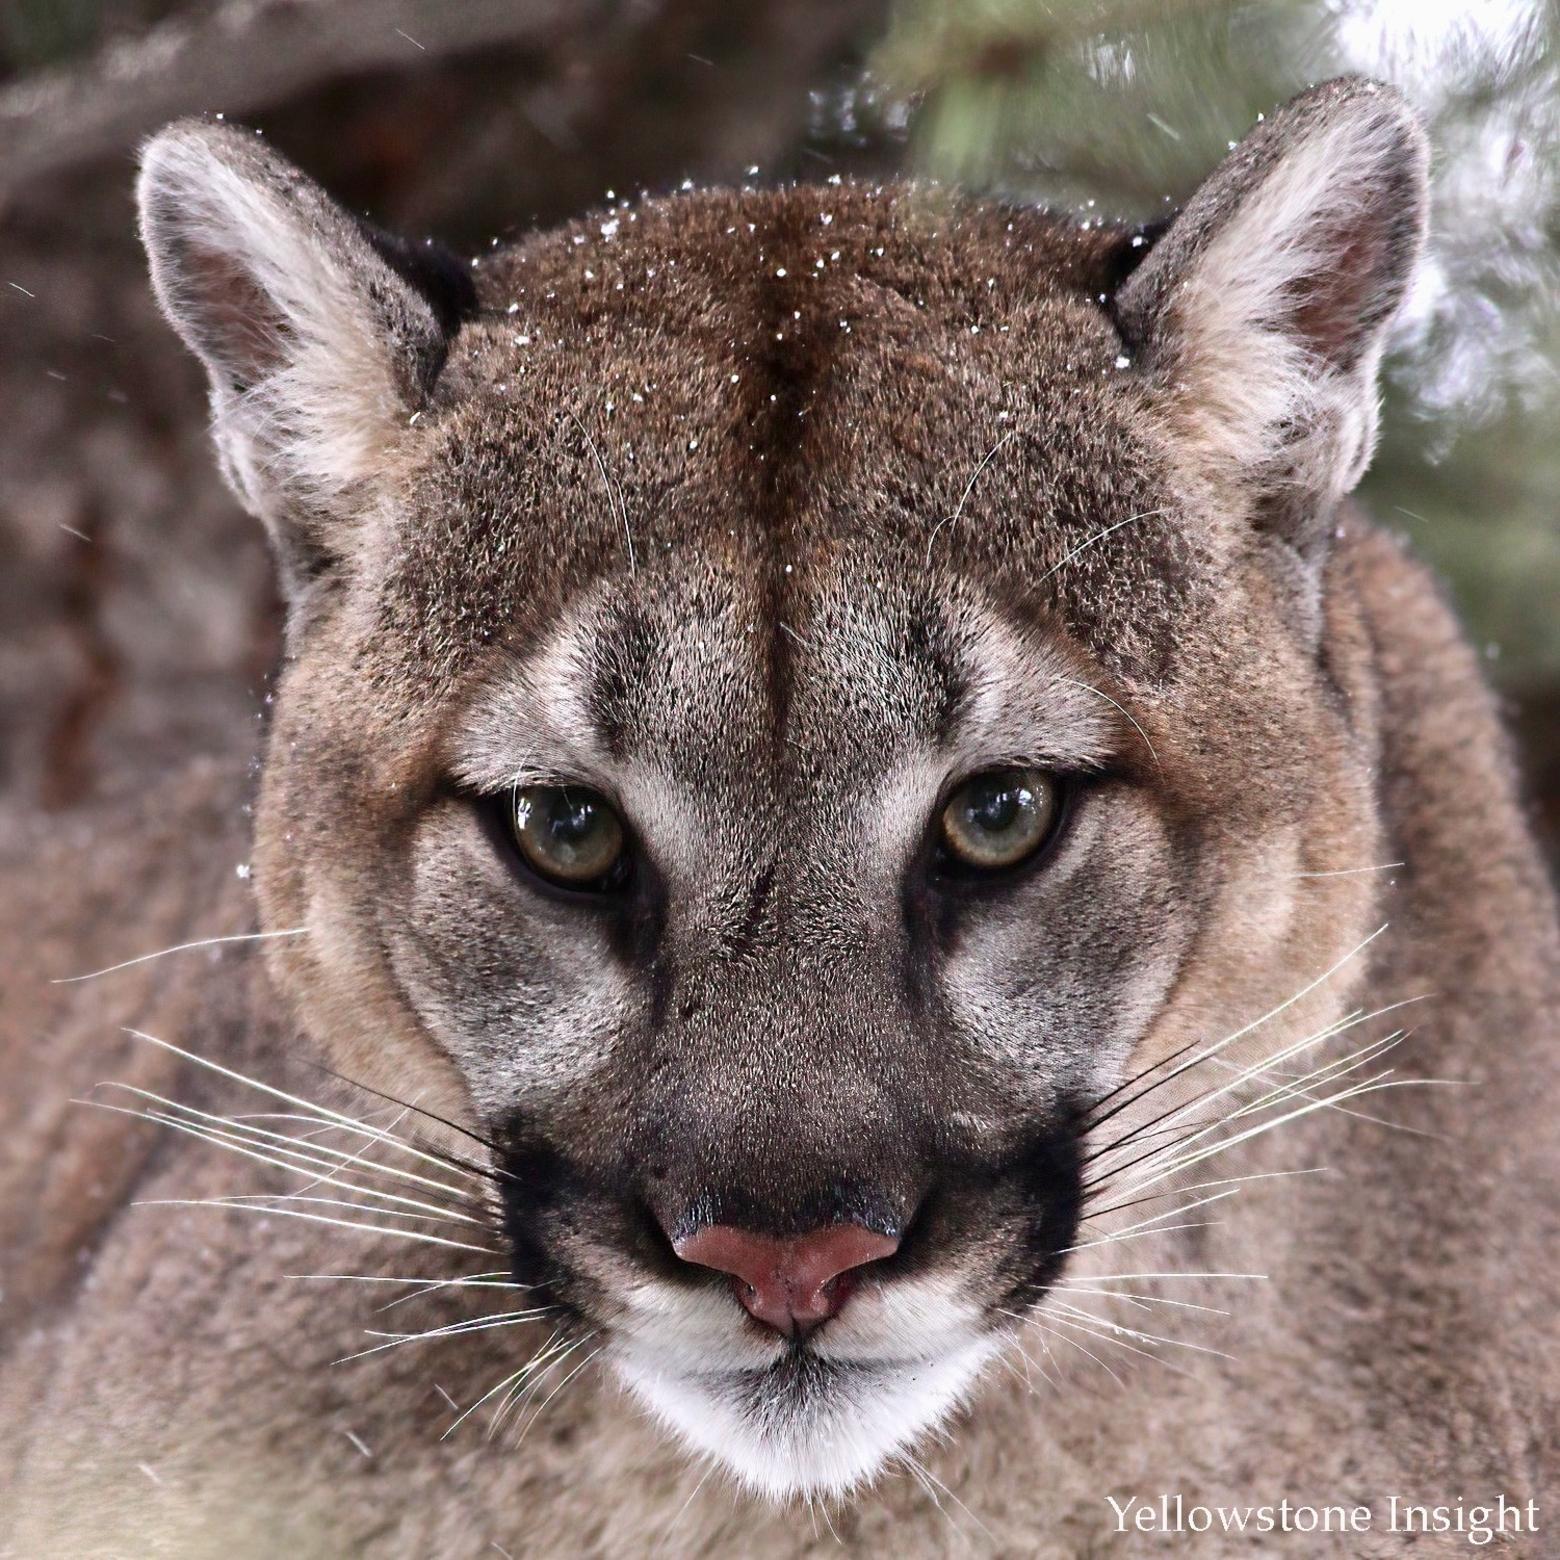 Of the 35 mountain lions the author has spotted, this image might be his favorite.